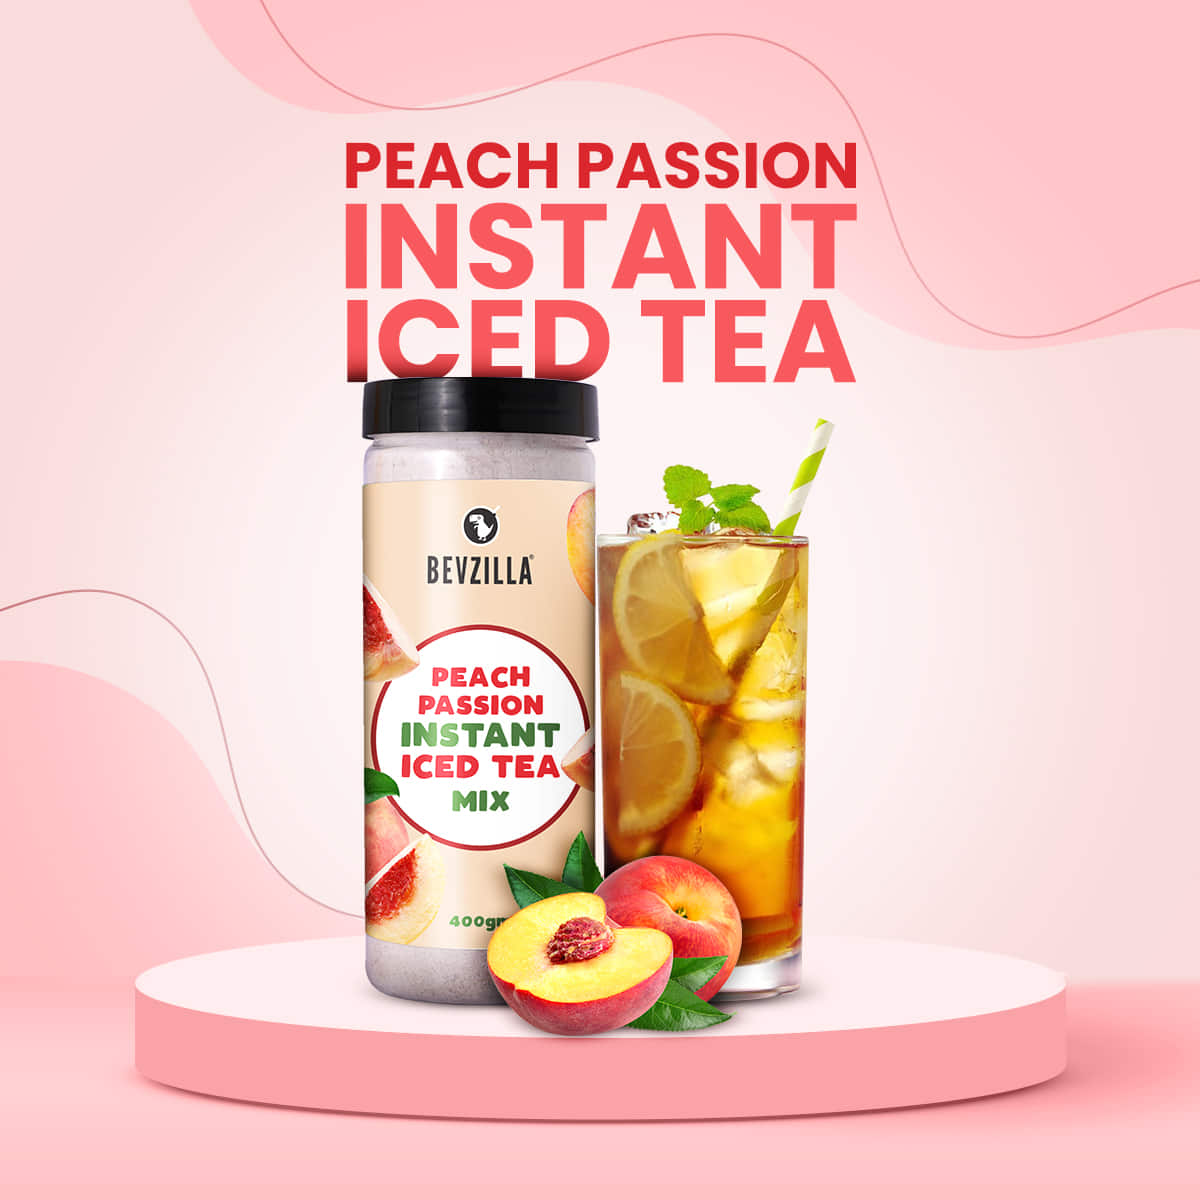 Peach Passion Instant Iced tea mix